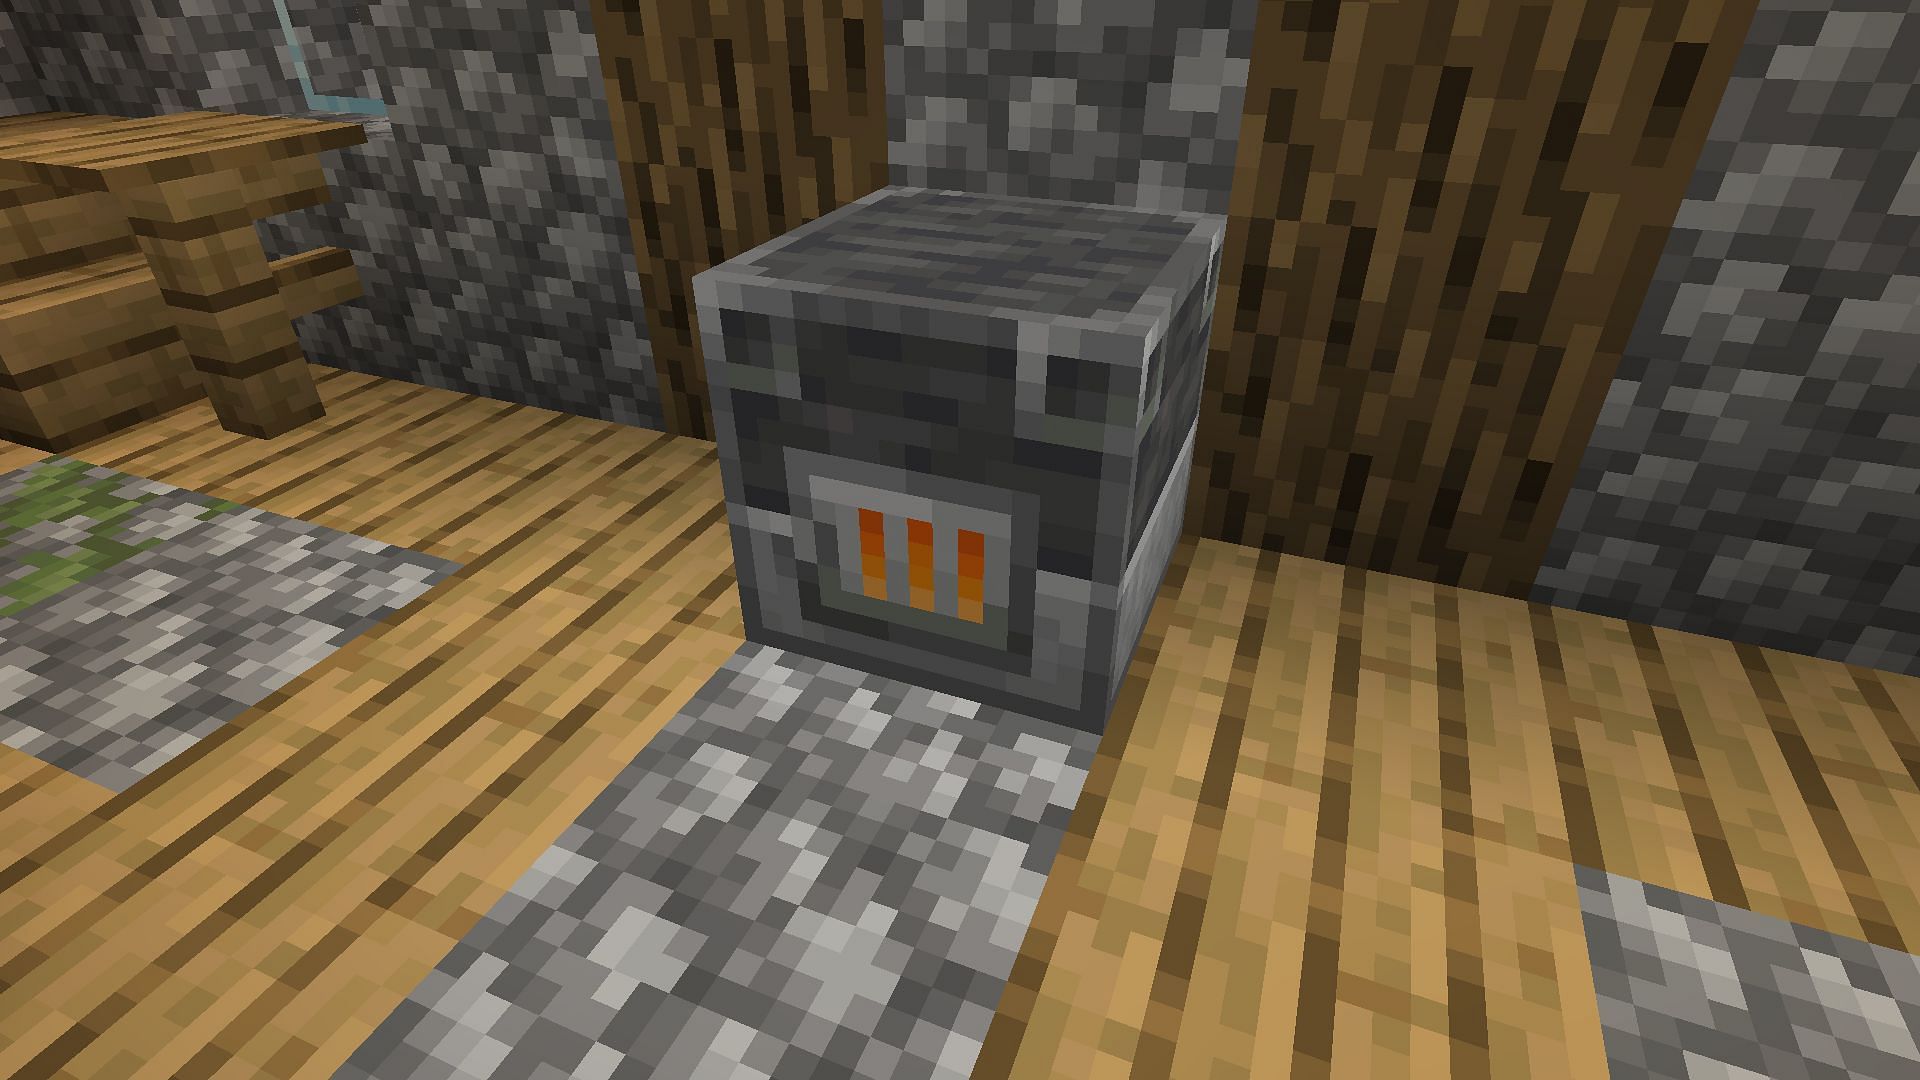 The Lit Blast Furnace block emits a light level of 13 in the game (Image via Mojang)